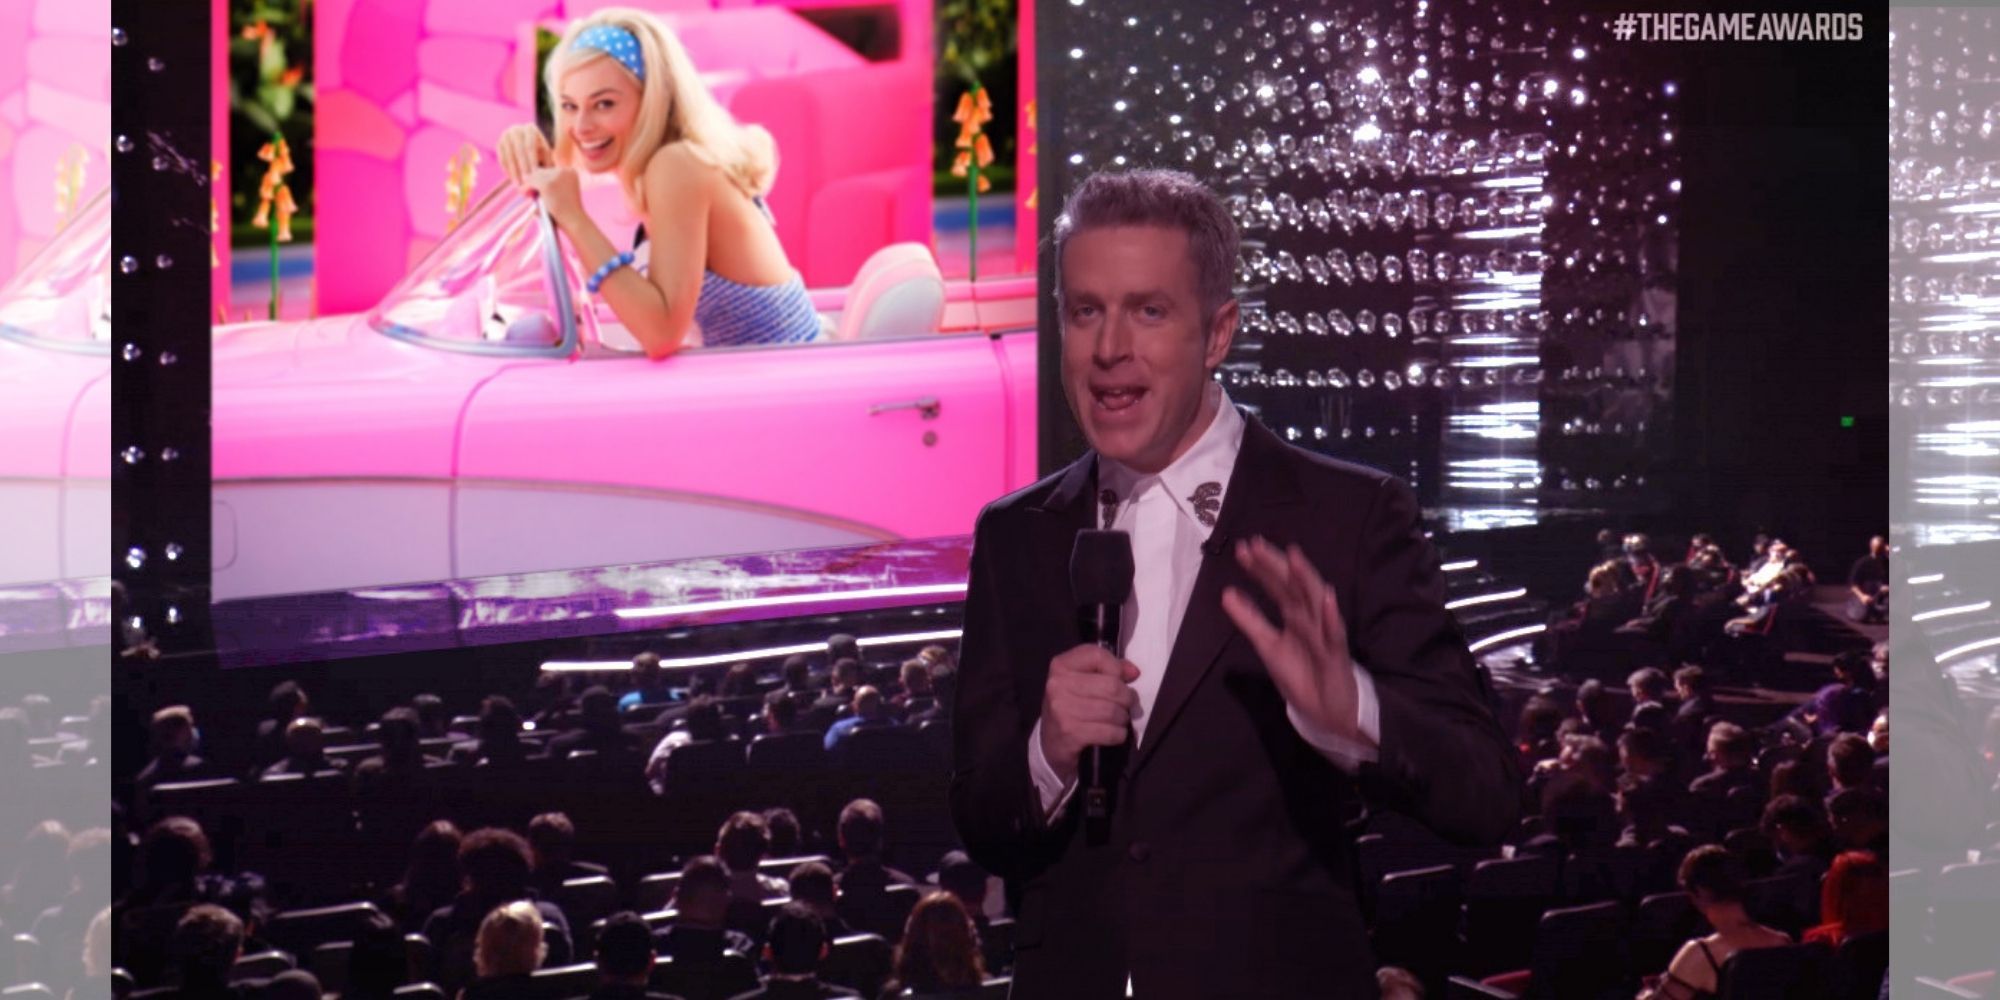 The Barbie Movie at The Game Awards